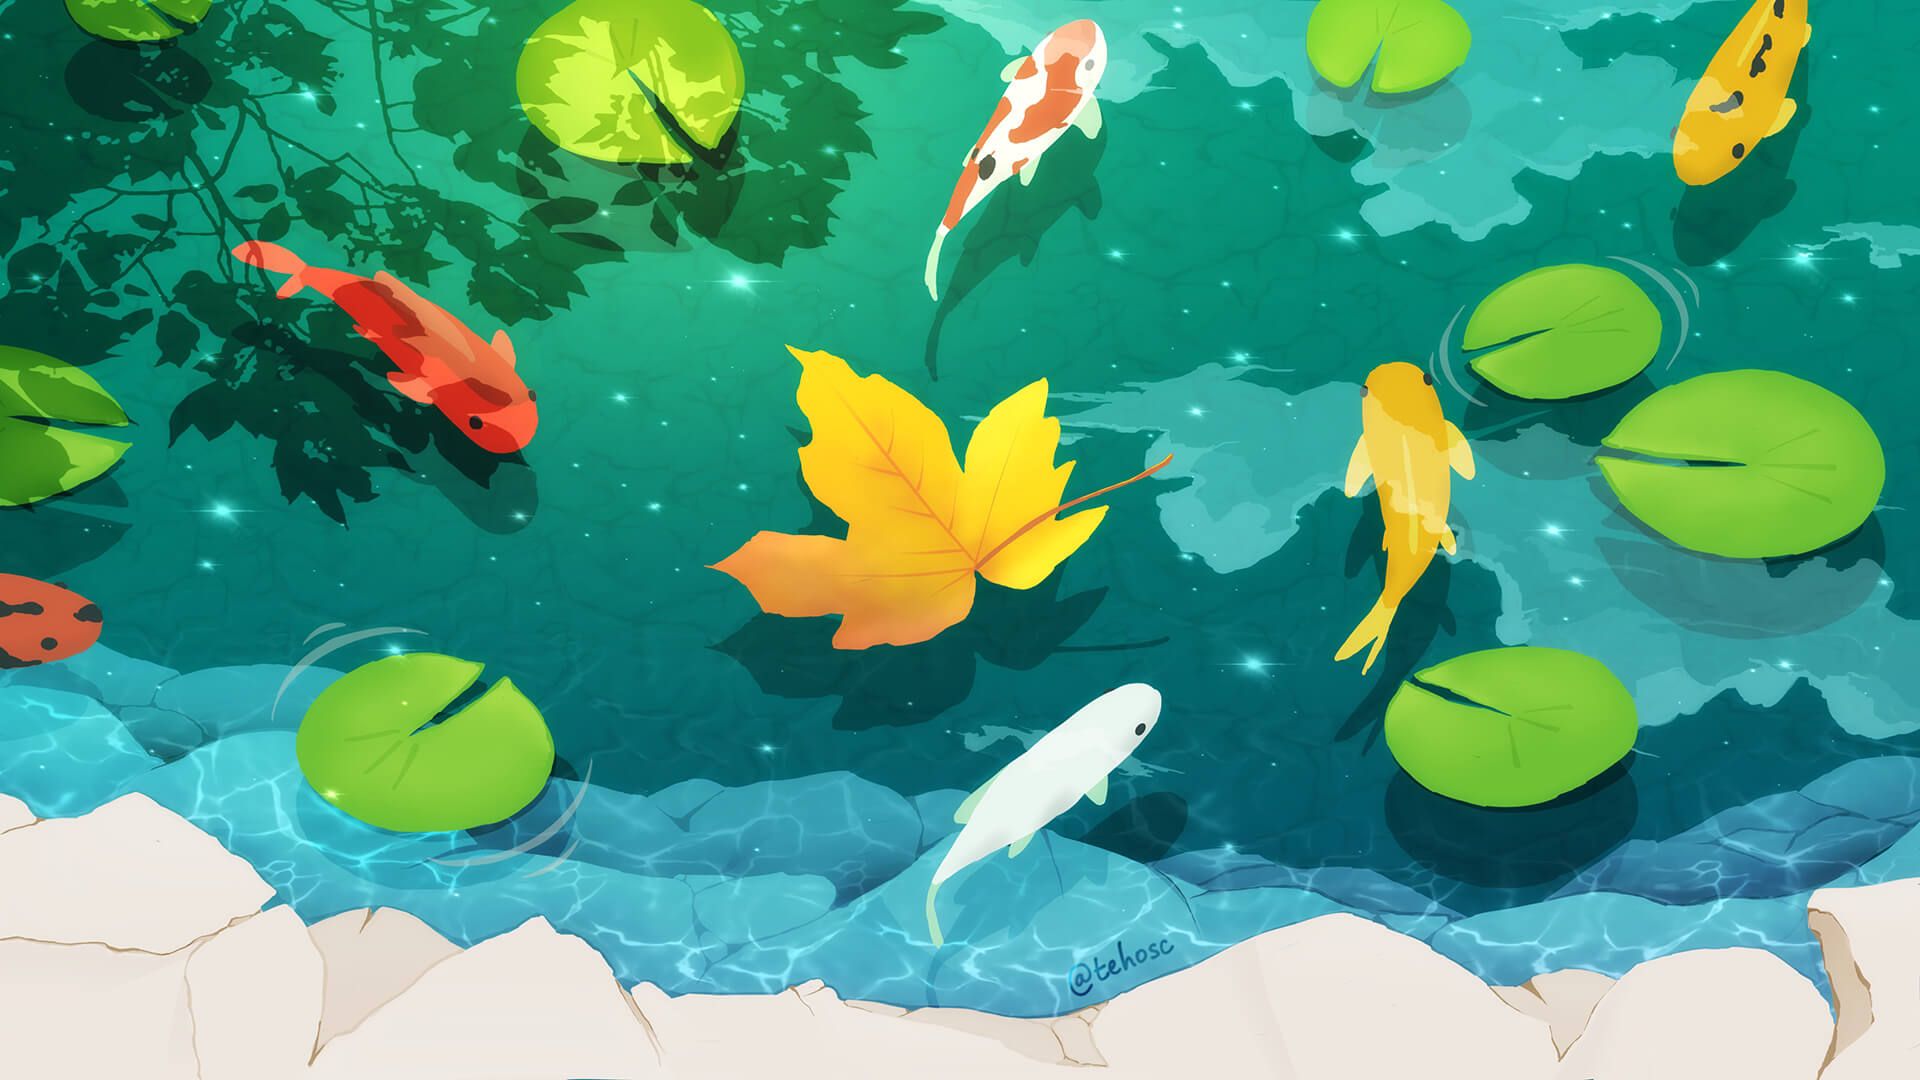 A paper art animation of fish swimming in a pond - Koi fish